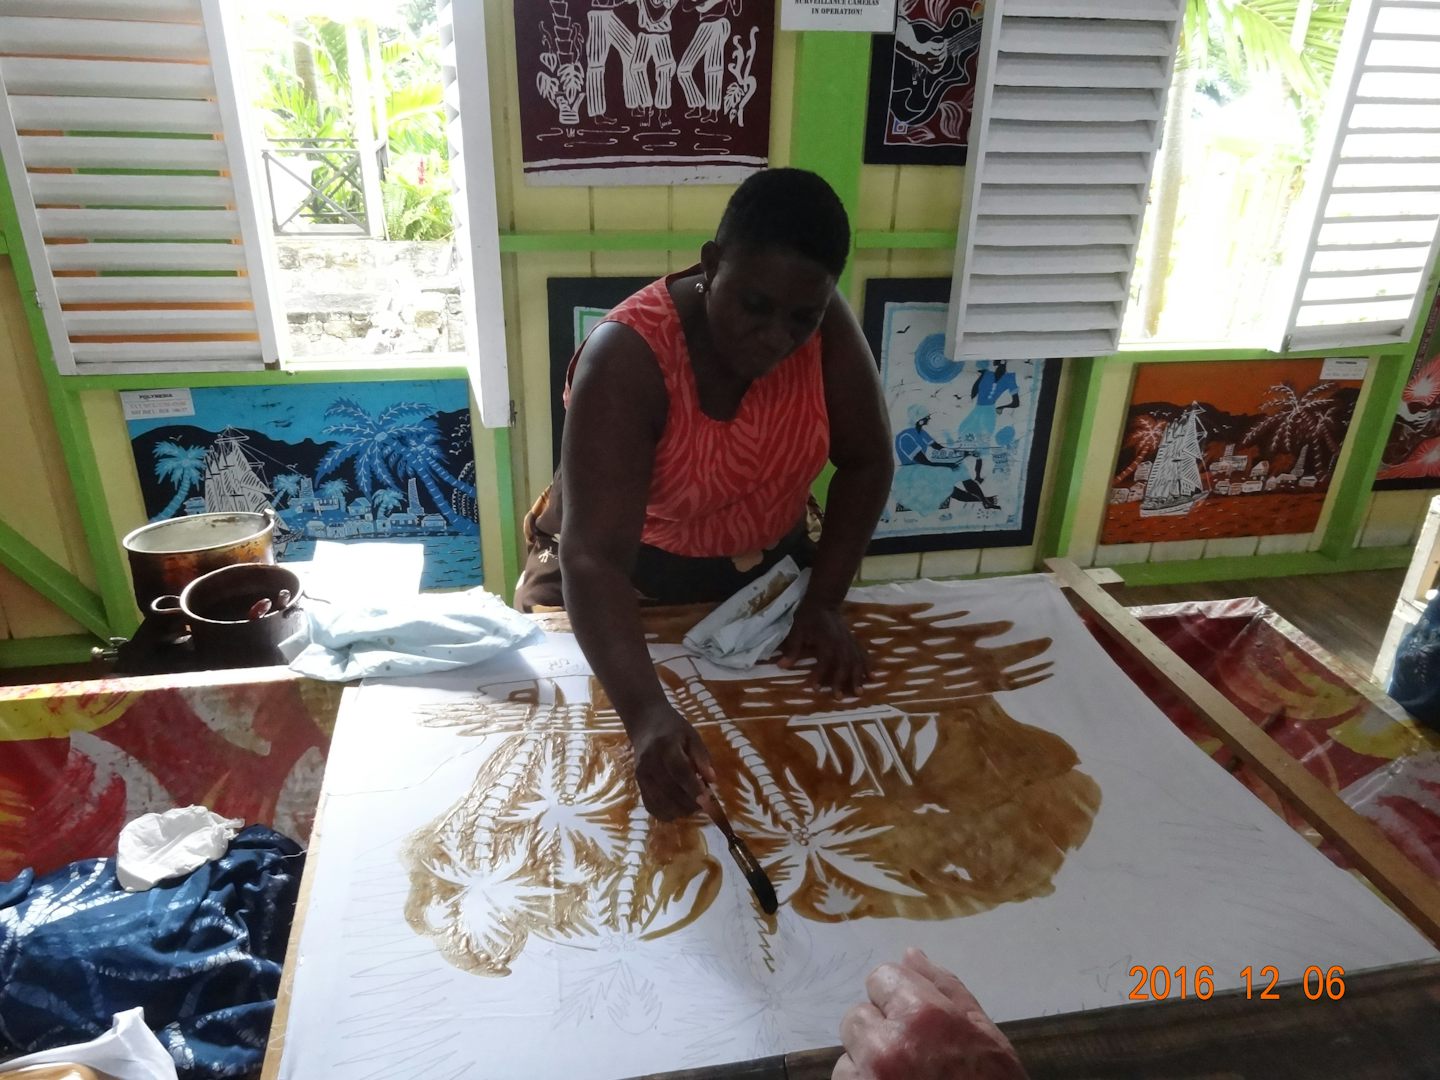 At Romney Manor the women are doing an art form called Batik, which involves waxing  the material and coloring what you want to highlight and then boiling the wax off after the colors have been added.  Very time consuming.